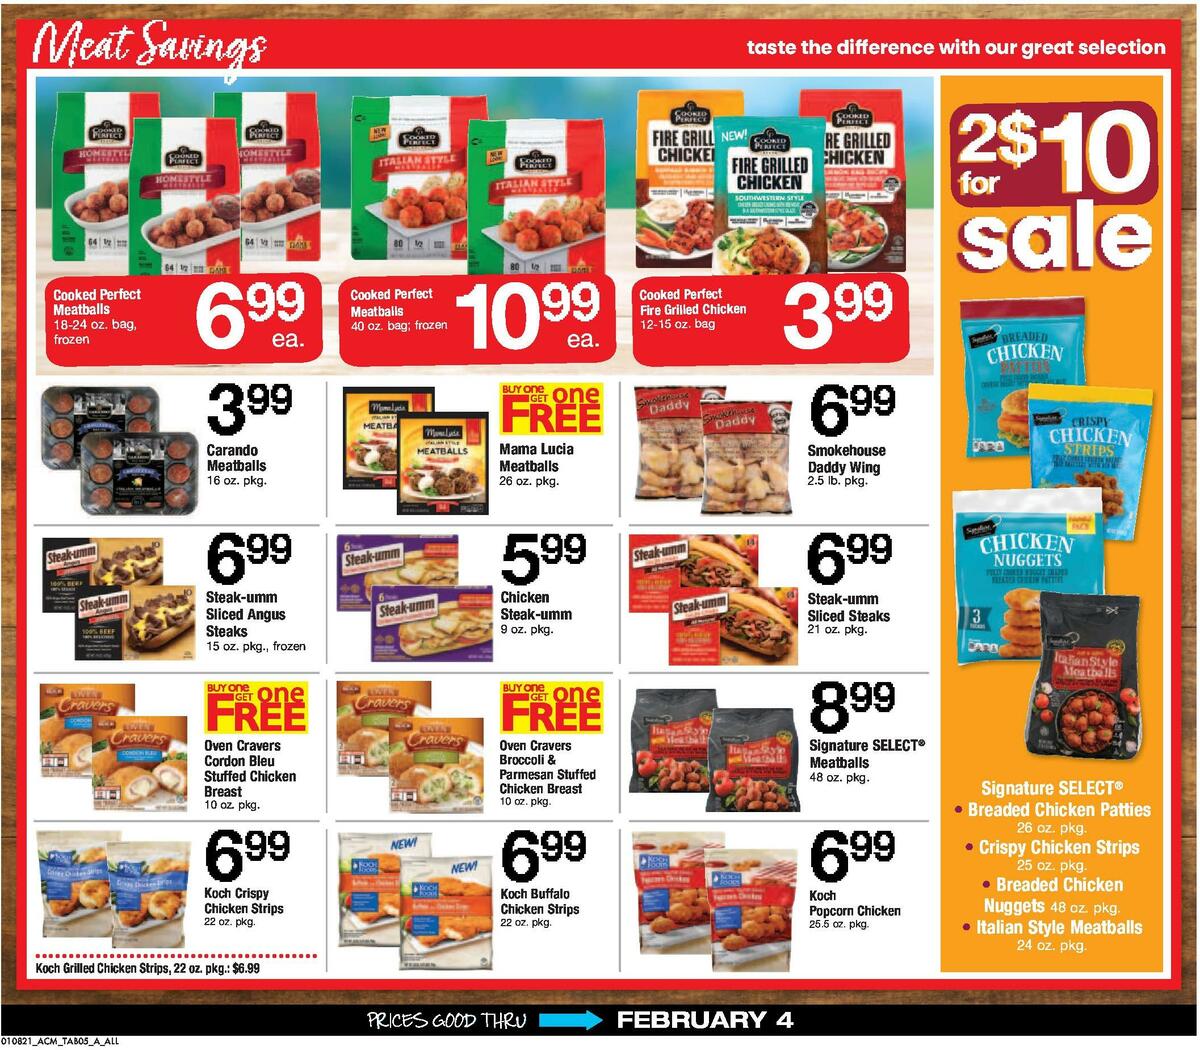 ACME Markets Big Book Weekly Ads & Special Buys for January 8 - Page 5